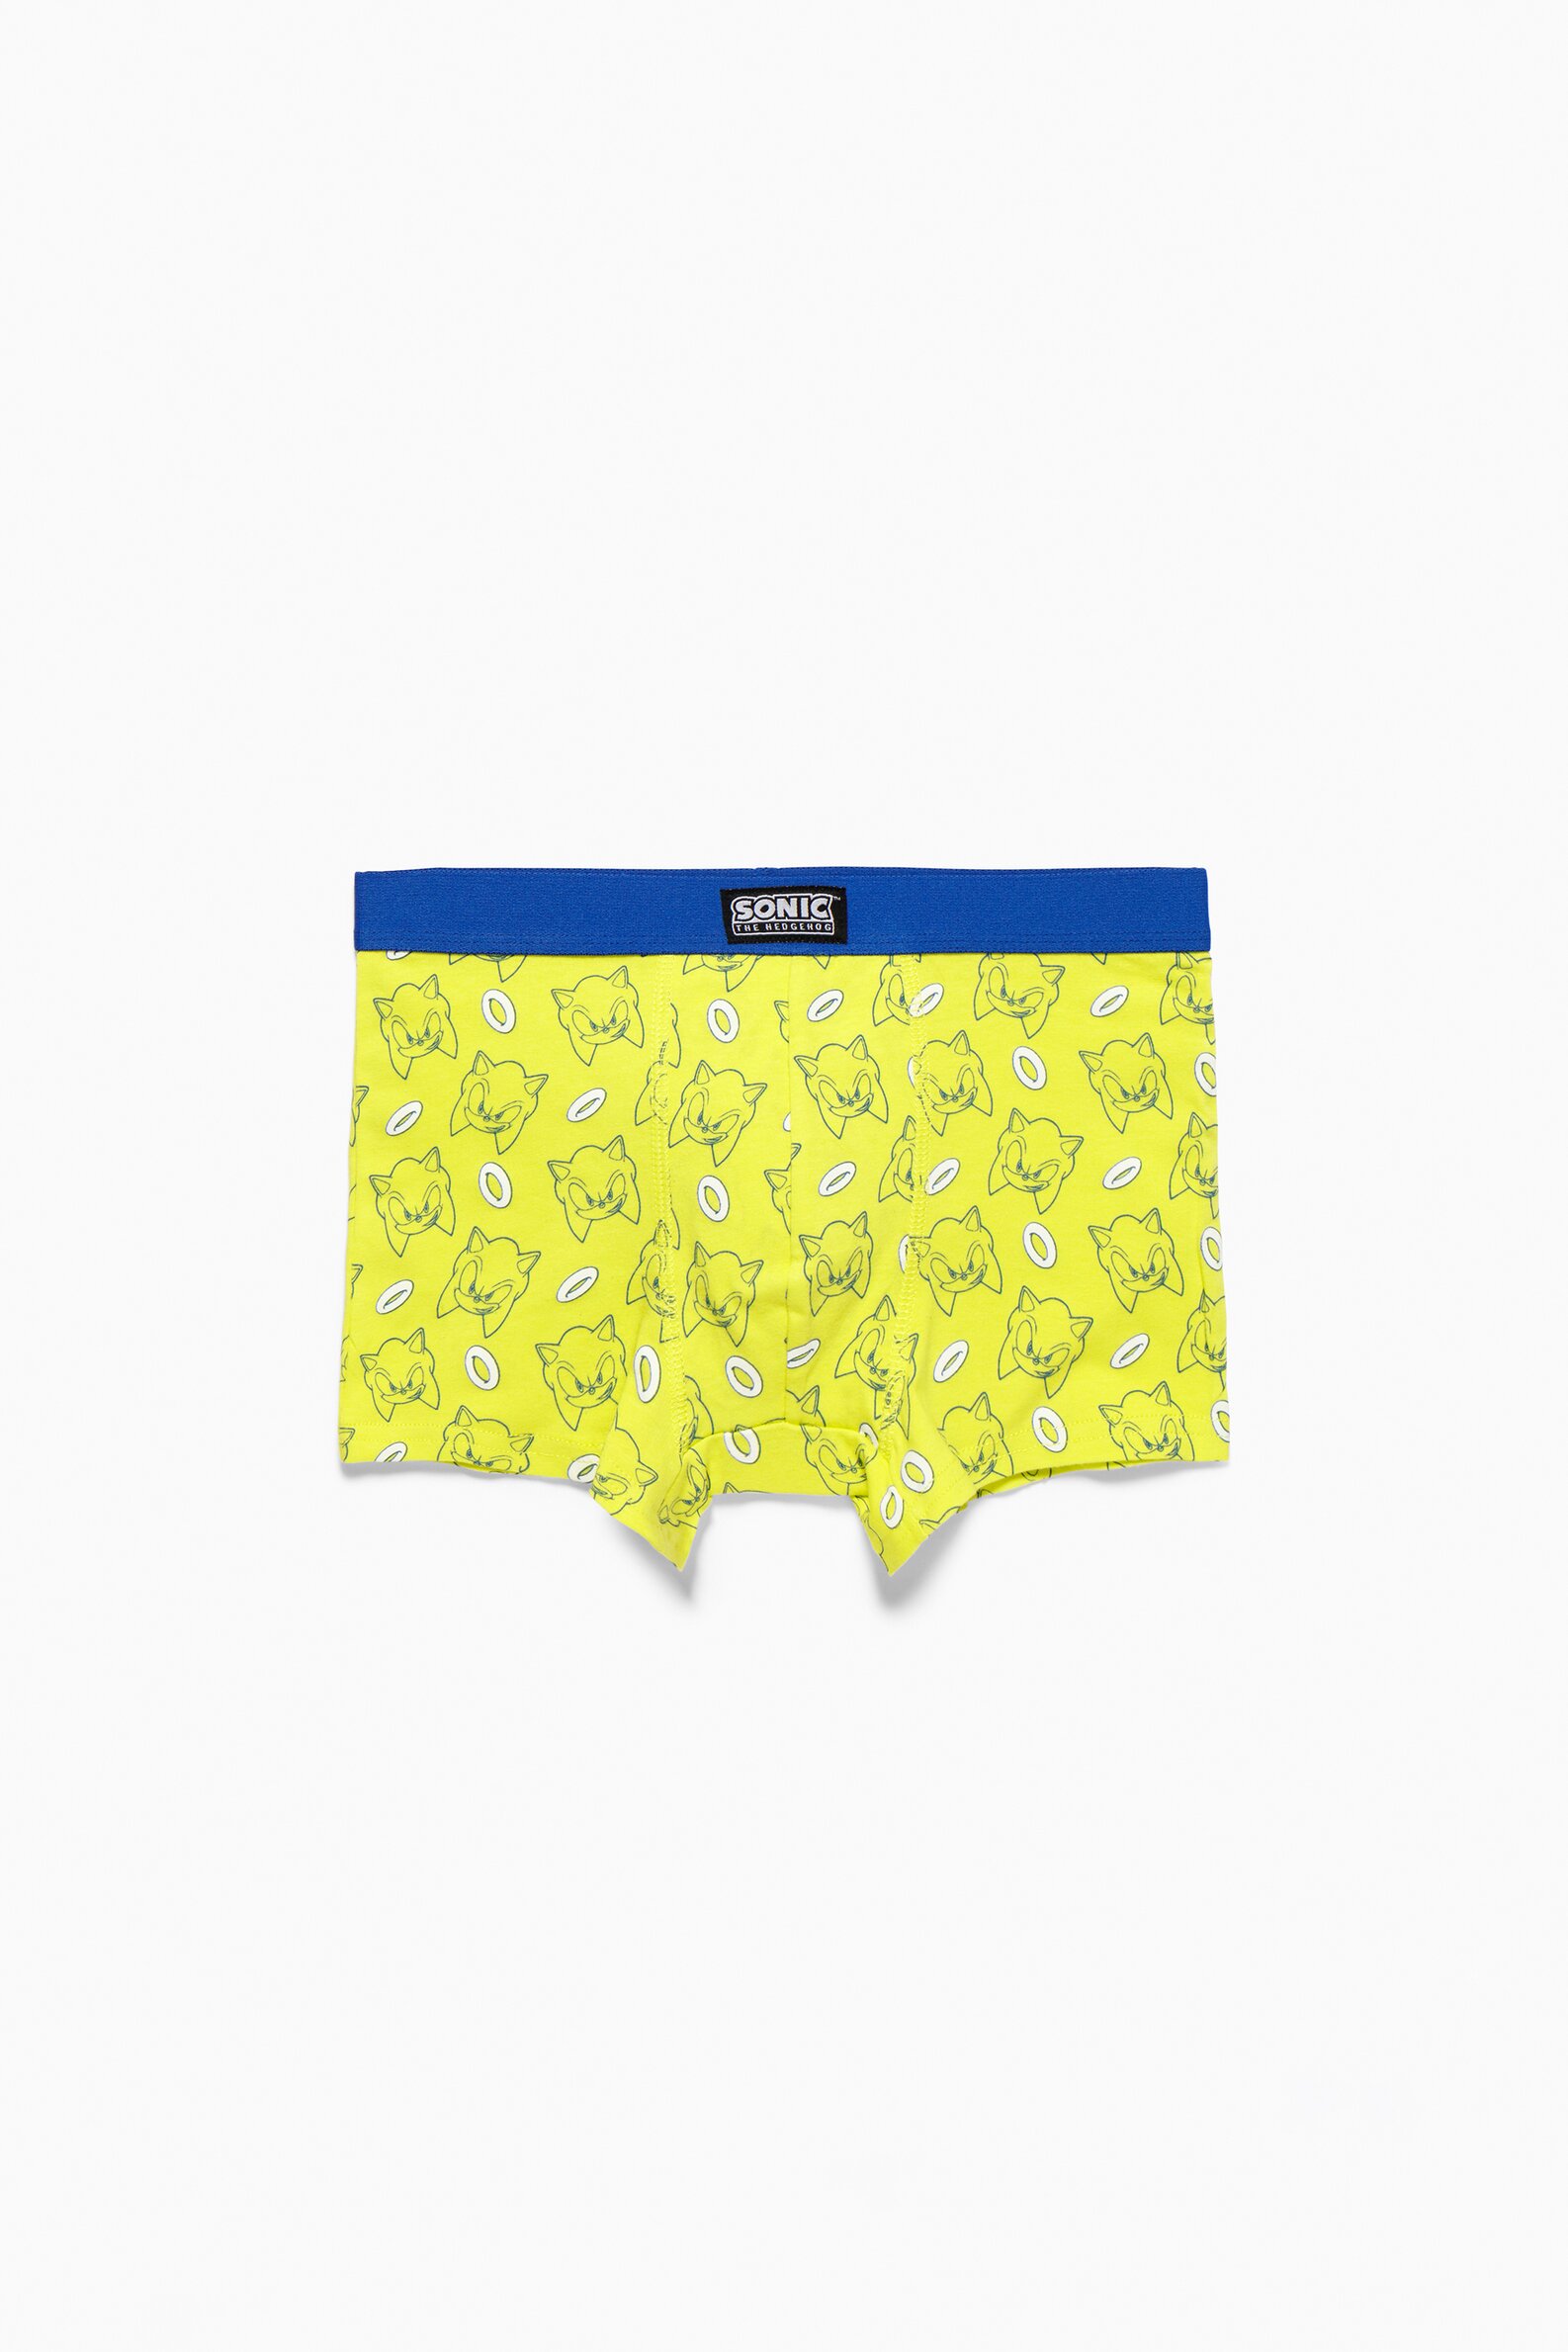 Pack of 3 pairs of Sonic™, Sega boxers - Collabs - CLOTHING - Boy - Kids 